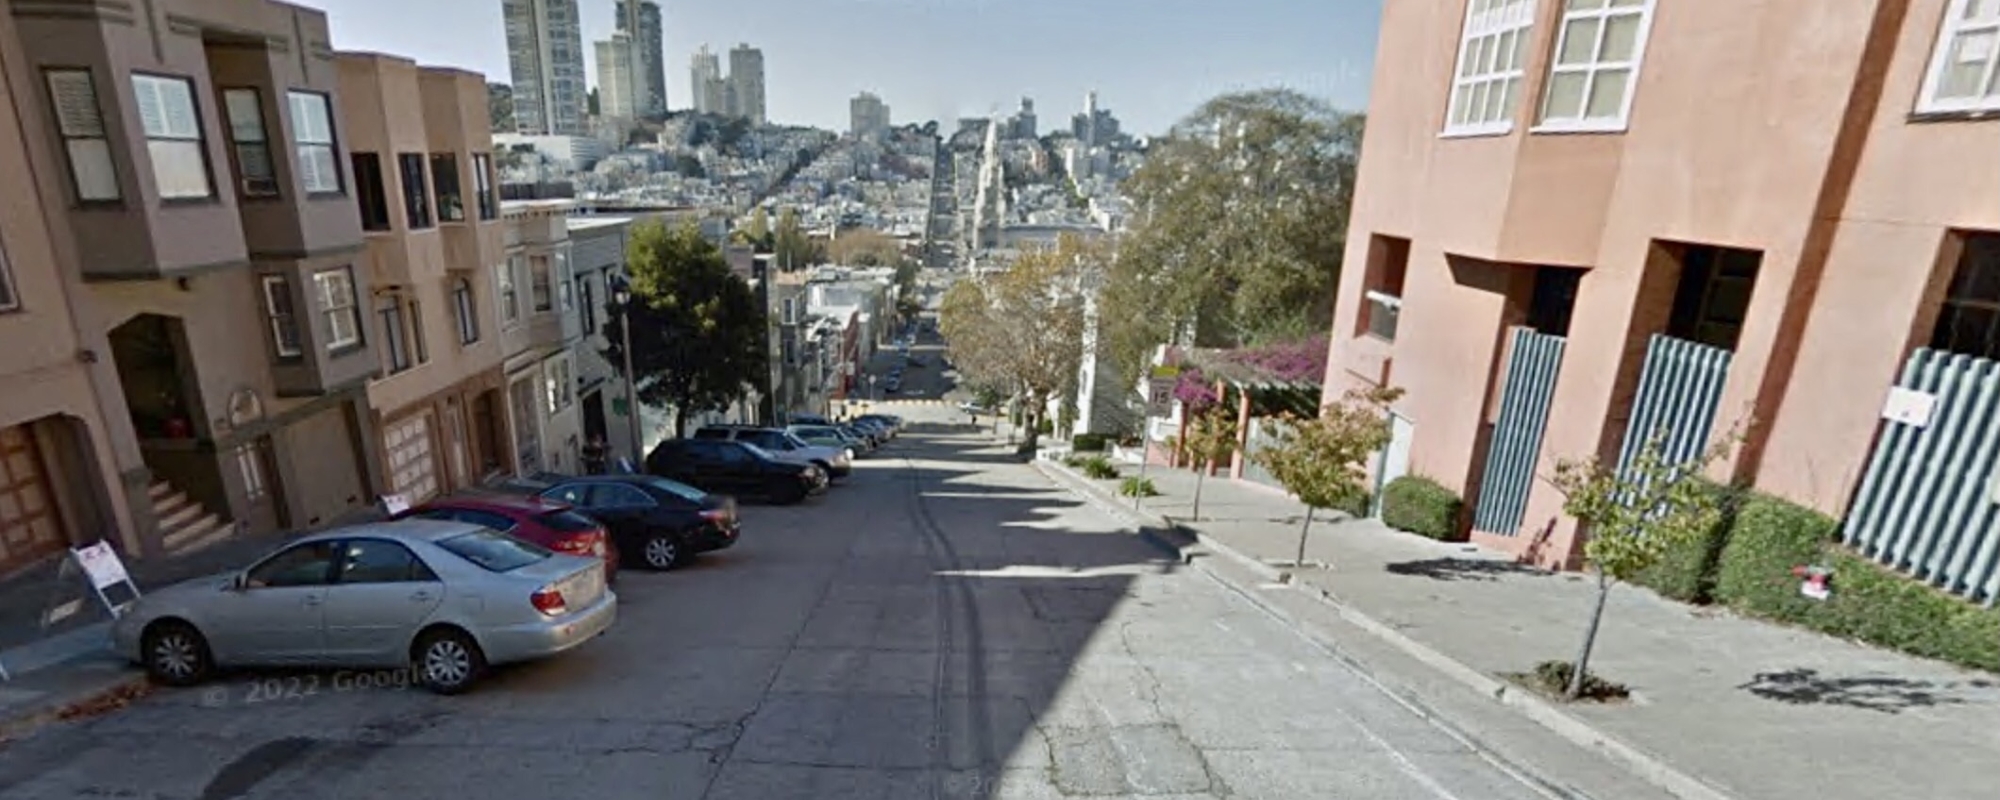 Current Street View 